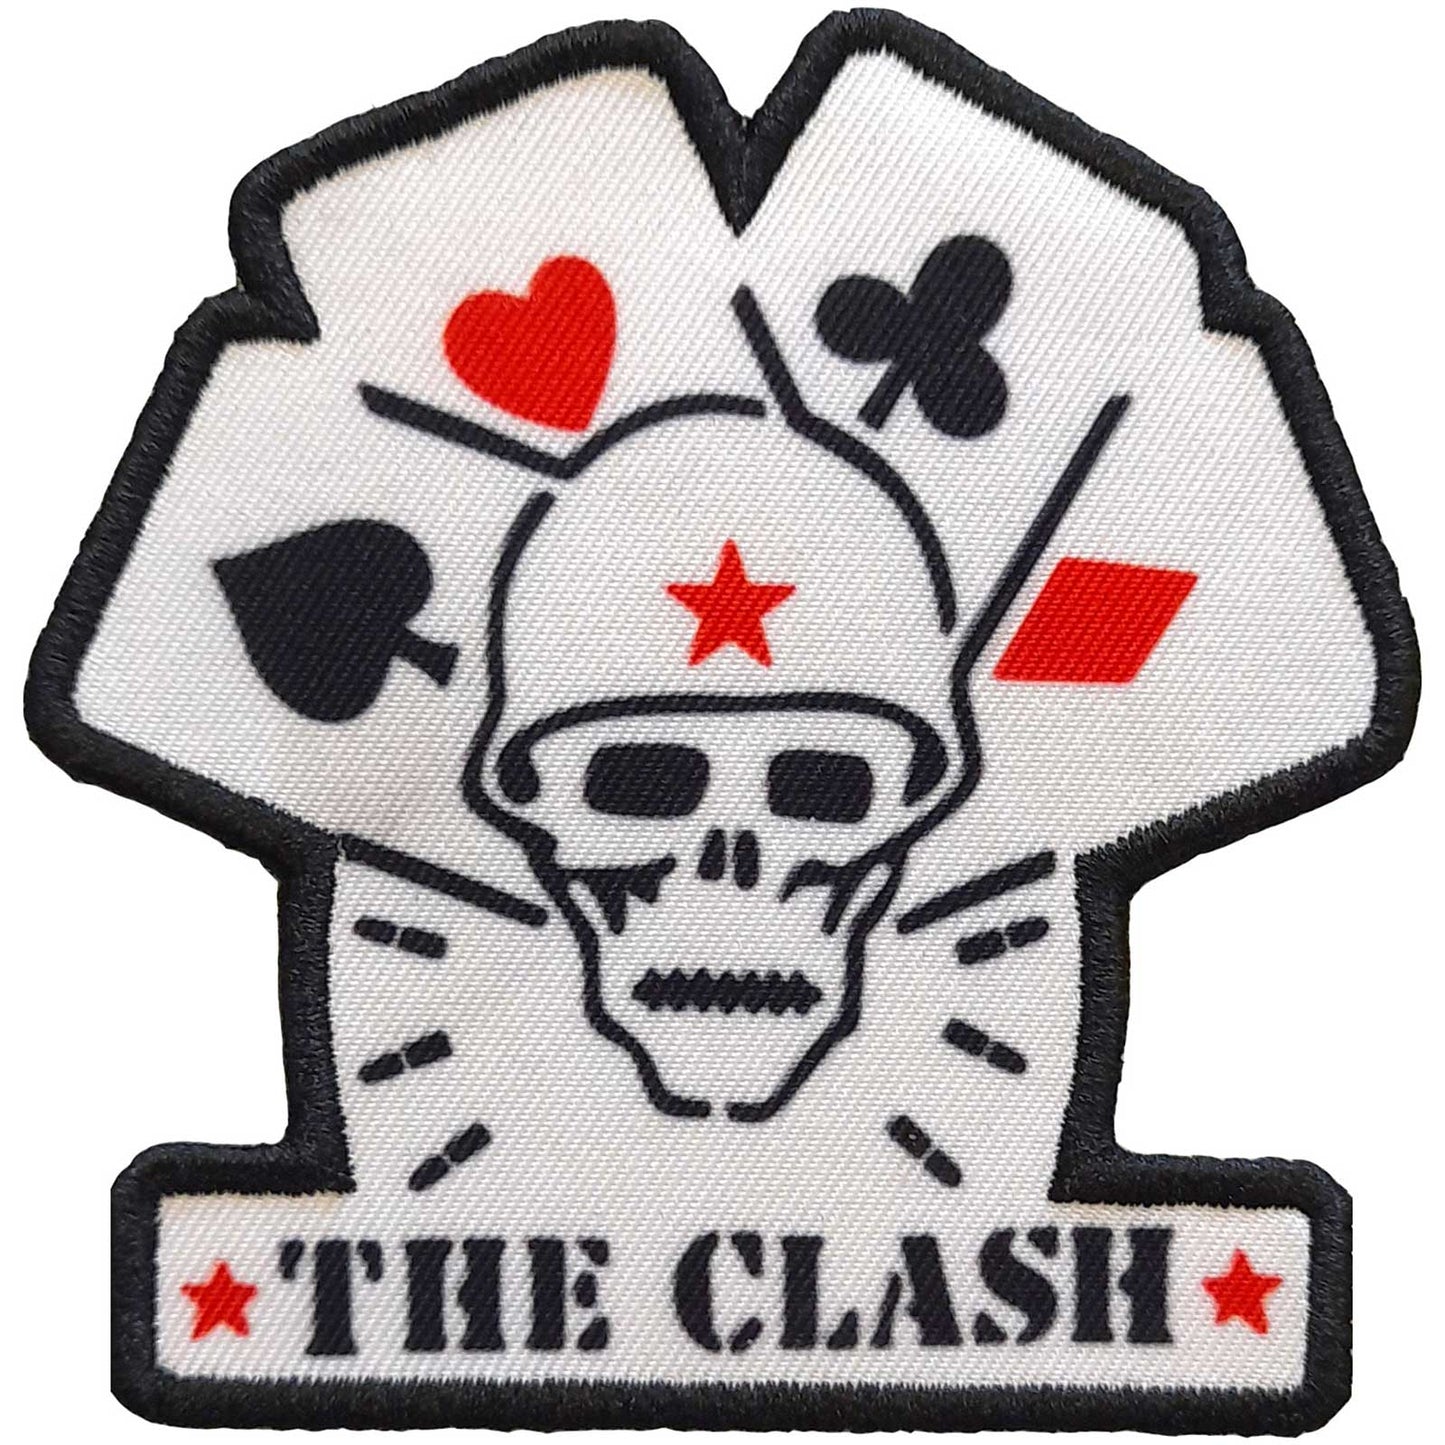 THE CLASH STANDARD PATCH: CARDS